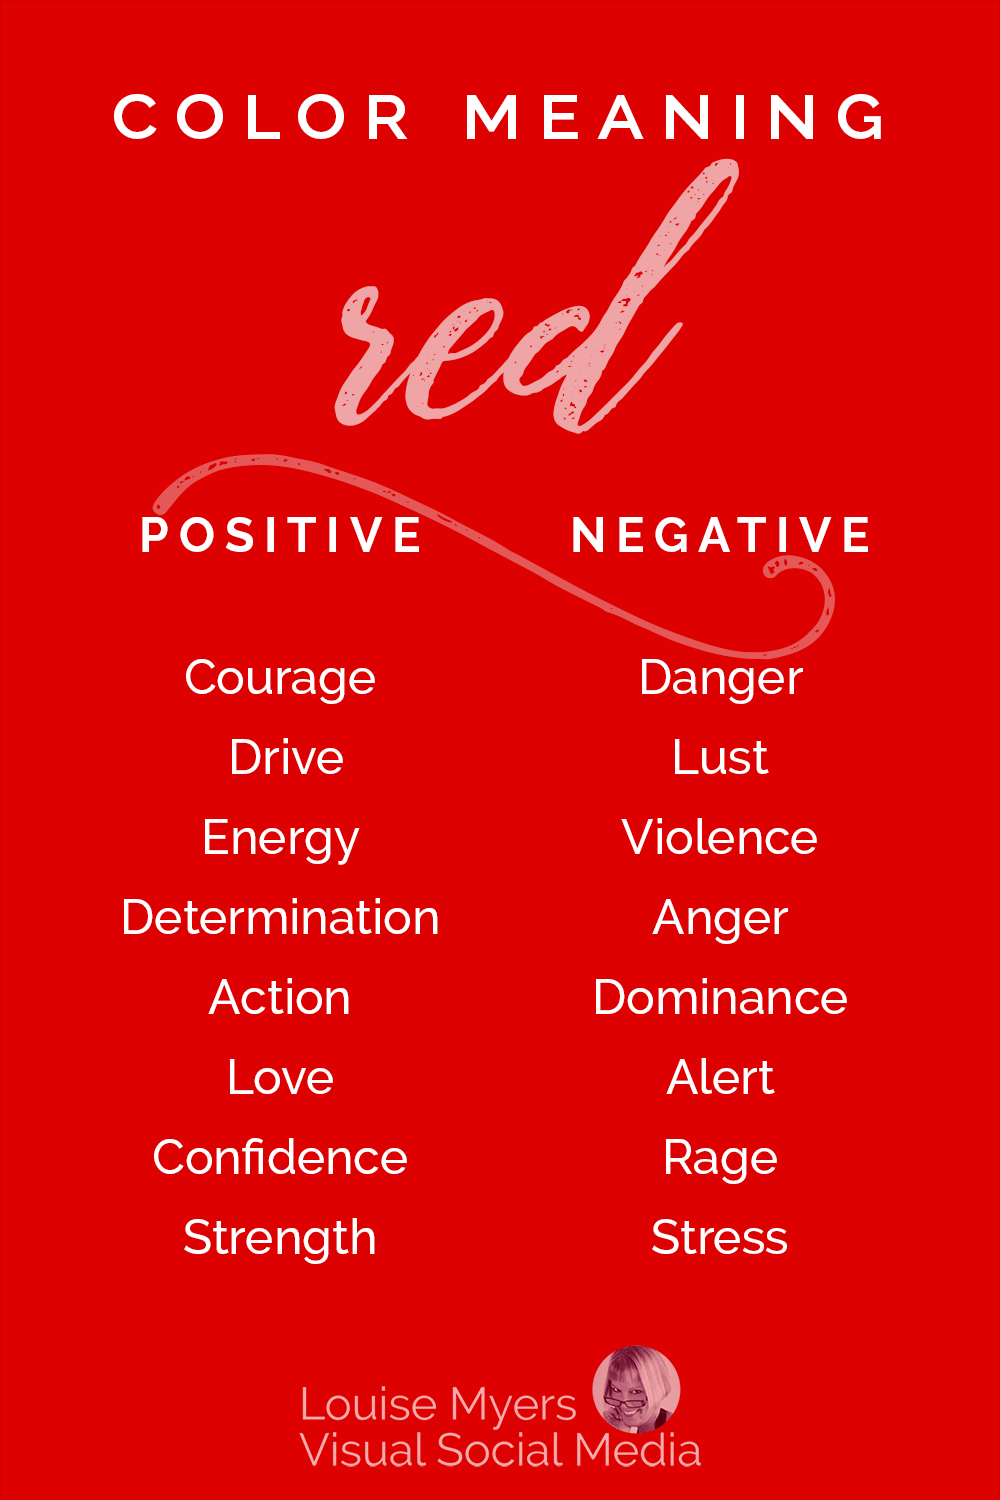 red graphic listing positive and negative meanings of red color.